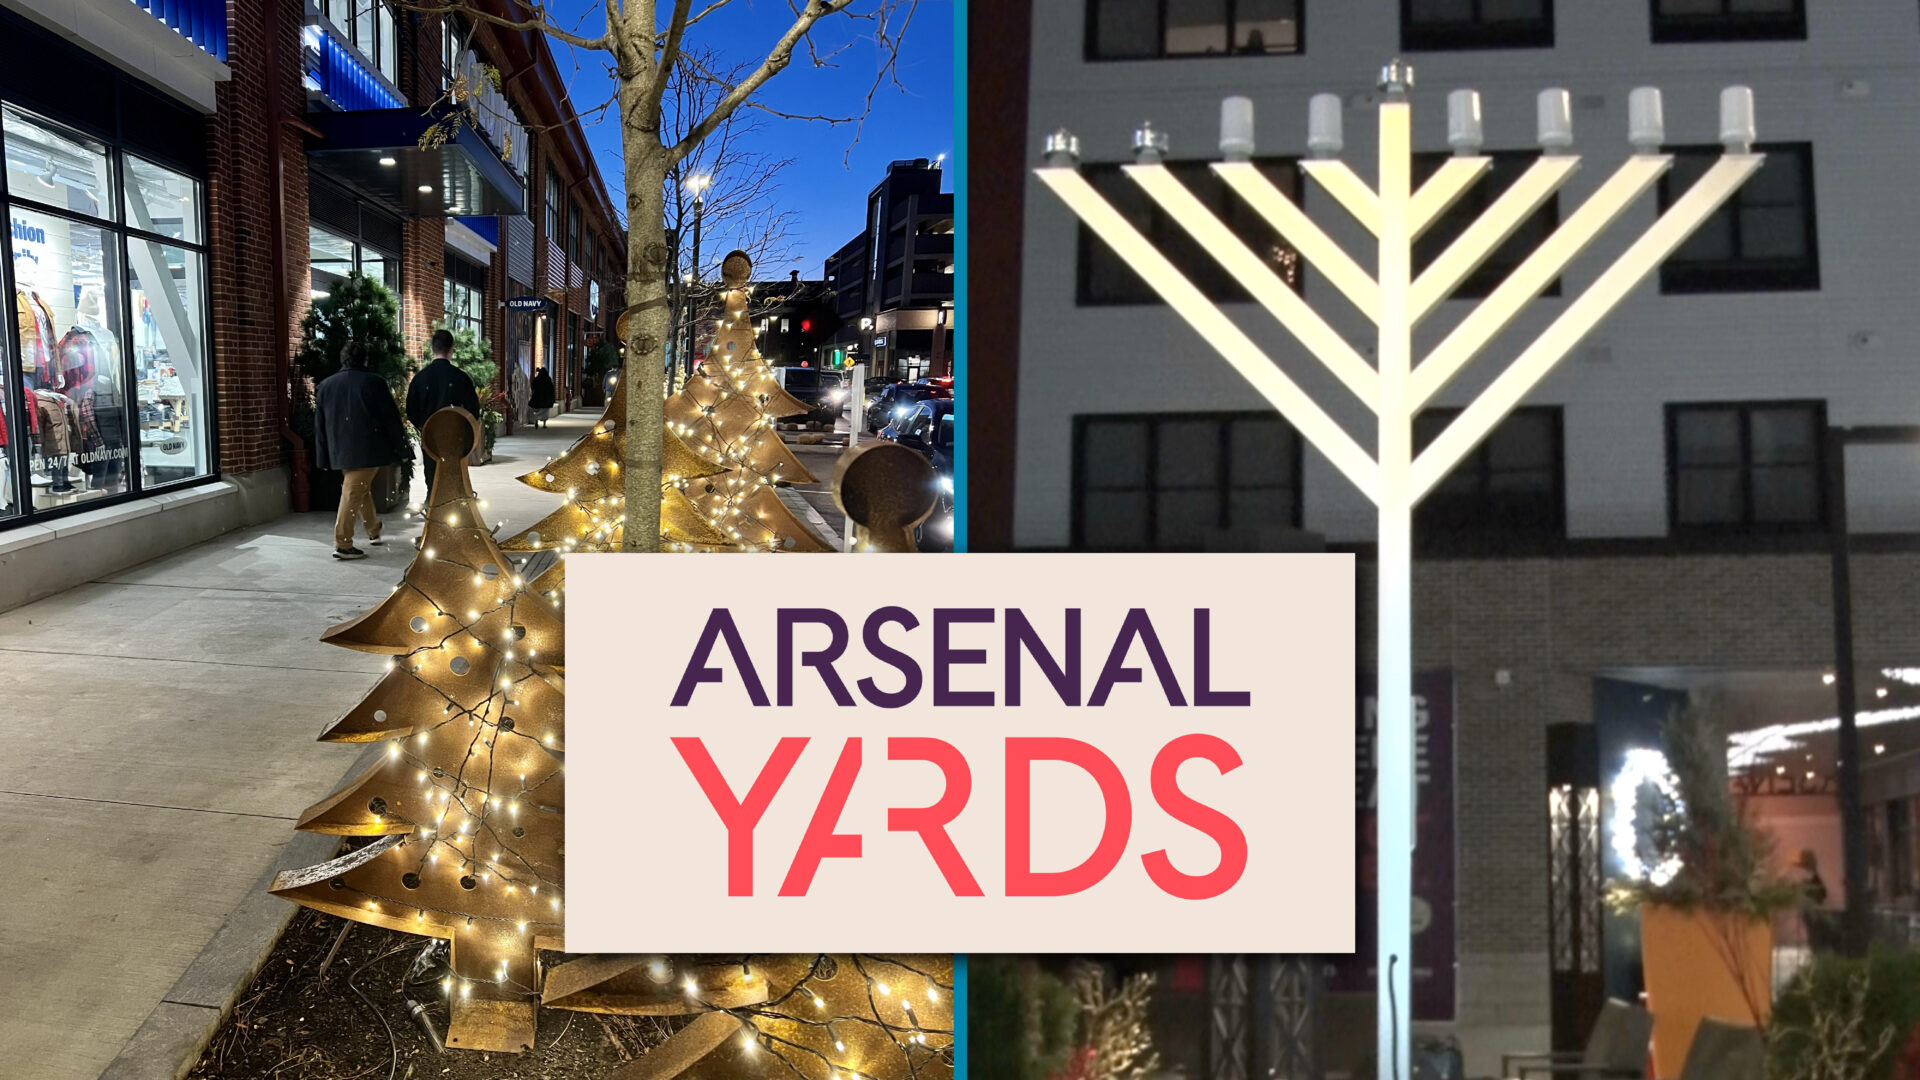 Hannukah Celebration, Holiday Pop-Up Shops, and Gift Drives Among Festive Activities Happening at Arsenal Yards